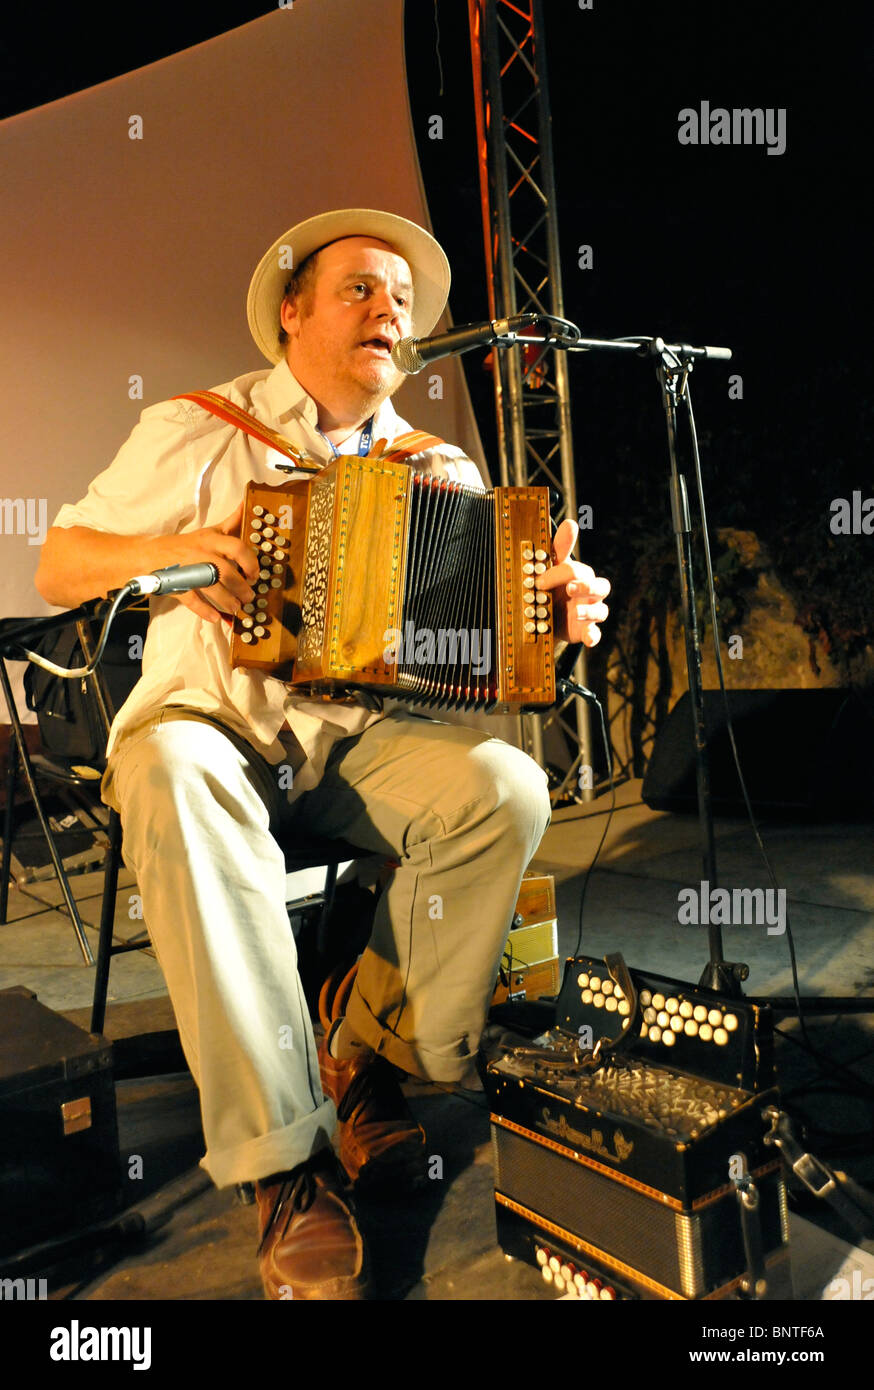 Accordionist playing diatonic accordions Parthenay Deux-Sevres France Stock Photo